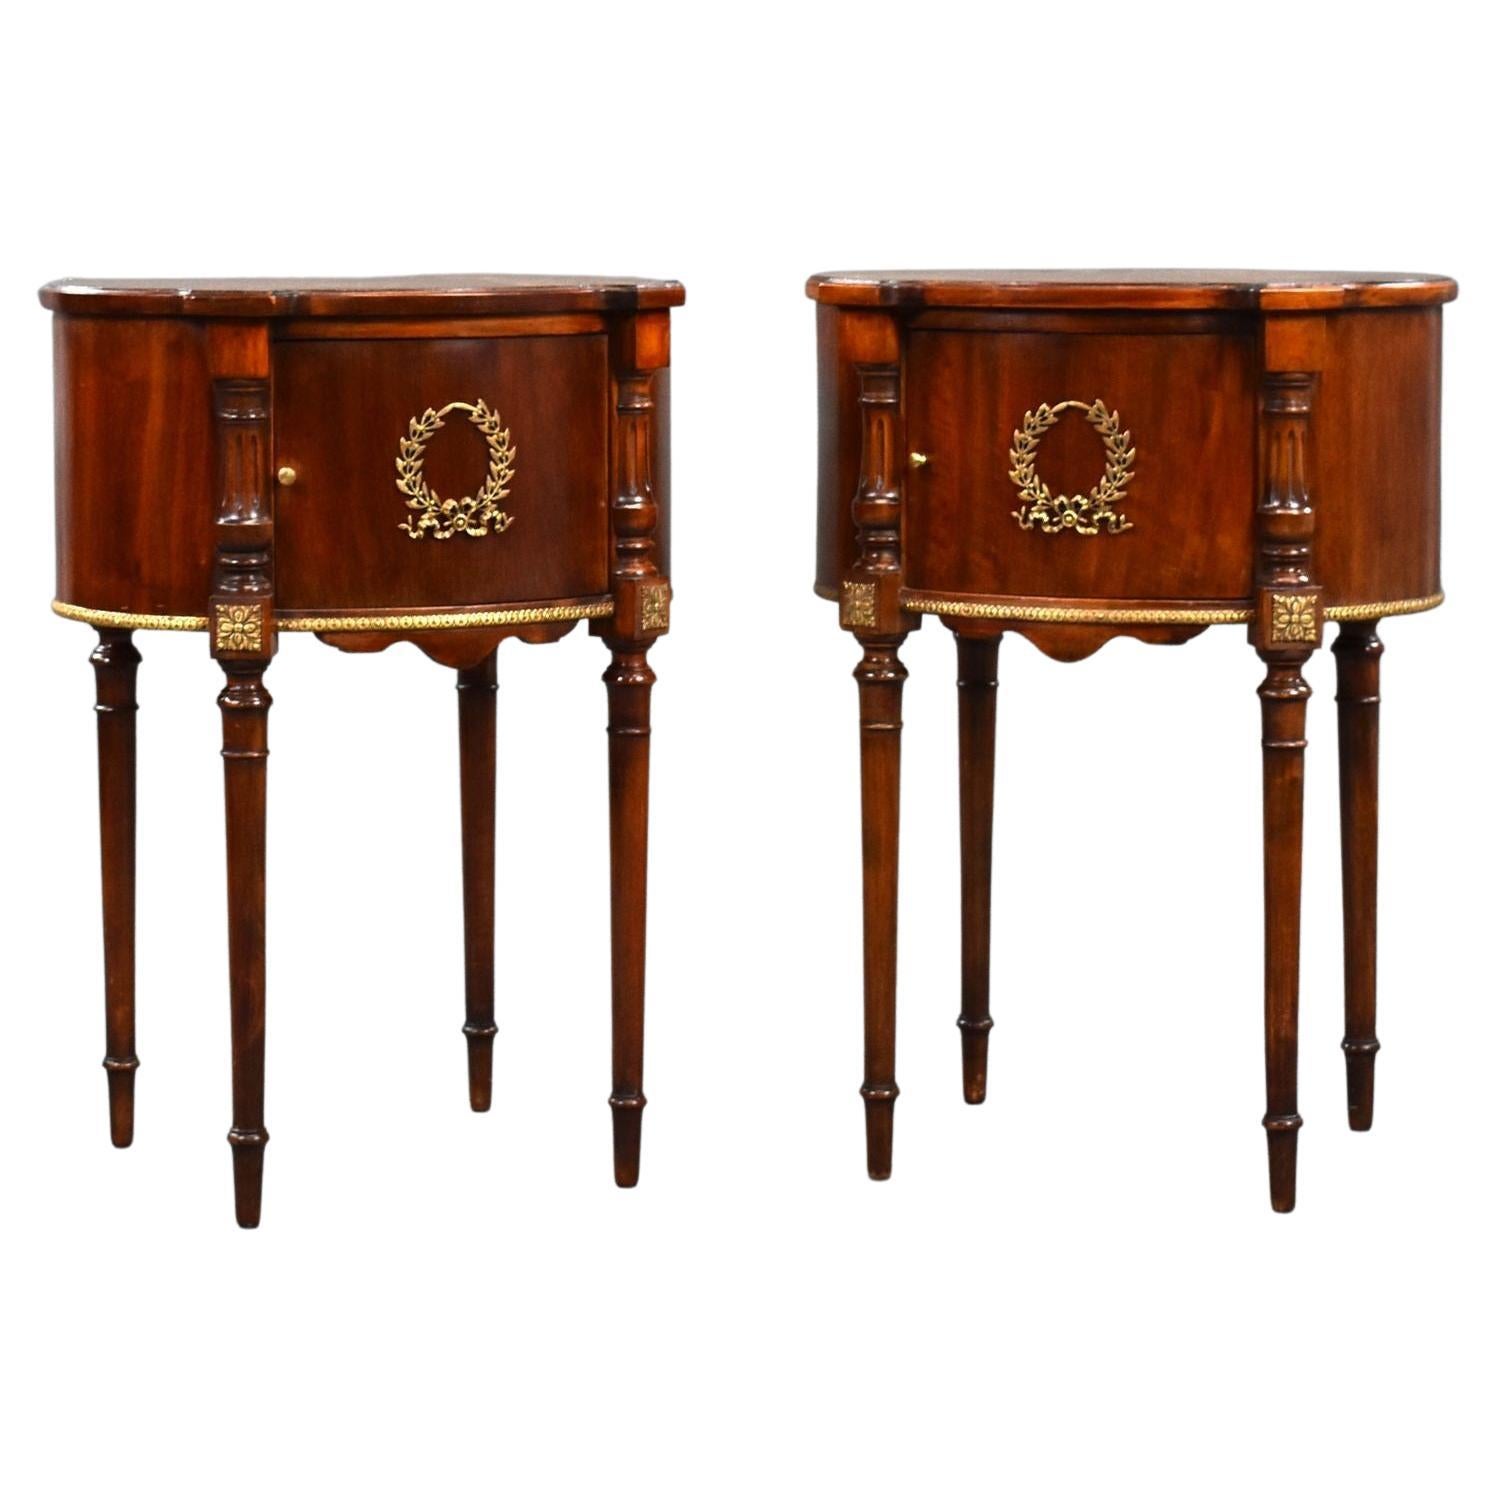 Pair of Antique Mahogany Bedside Tables